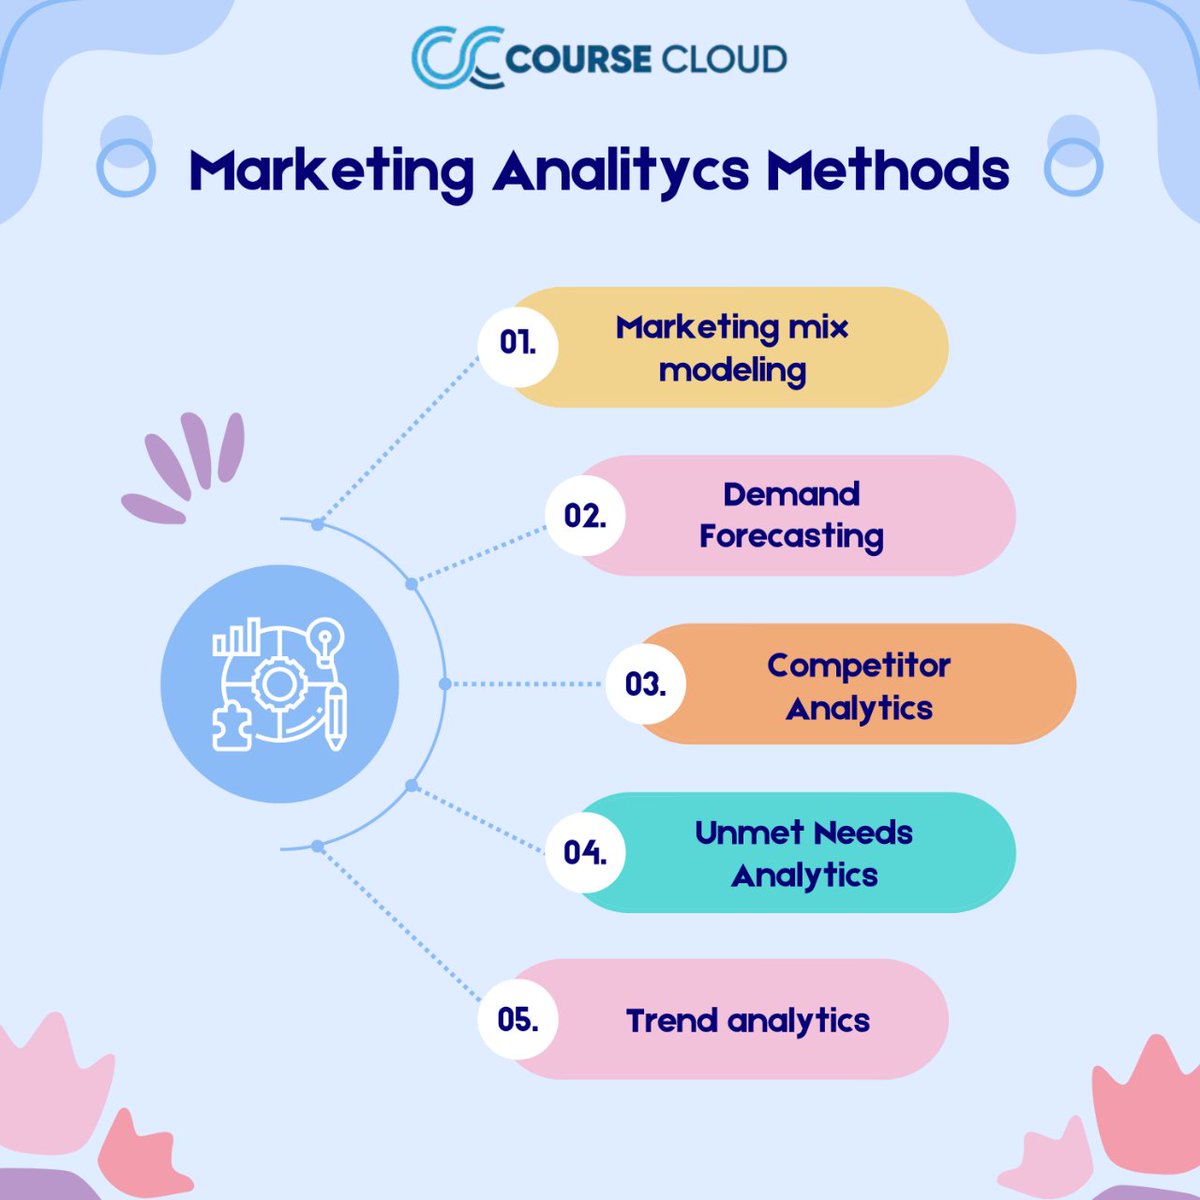 Master the metrics that matter with Course Cloud's Marketing Analytics Methods. From forecasting to trend analysis, gain the insights to innovate and lead in your market. 
#MarketingMetrics #DataDriven #CourseCloud #AnalyticsSuccess